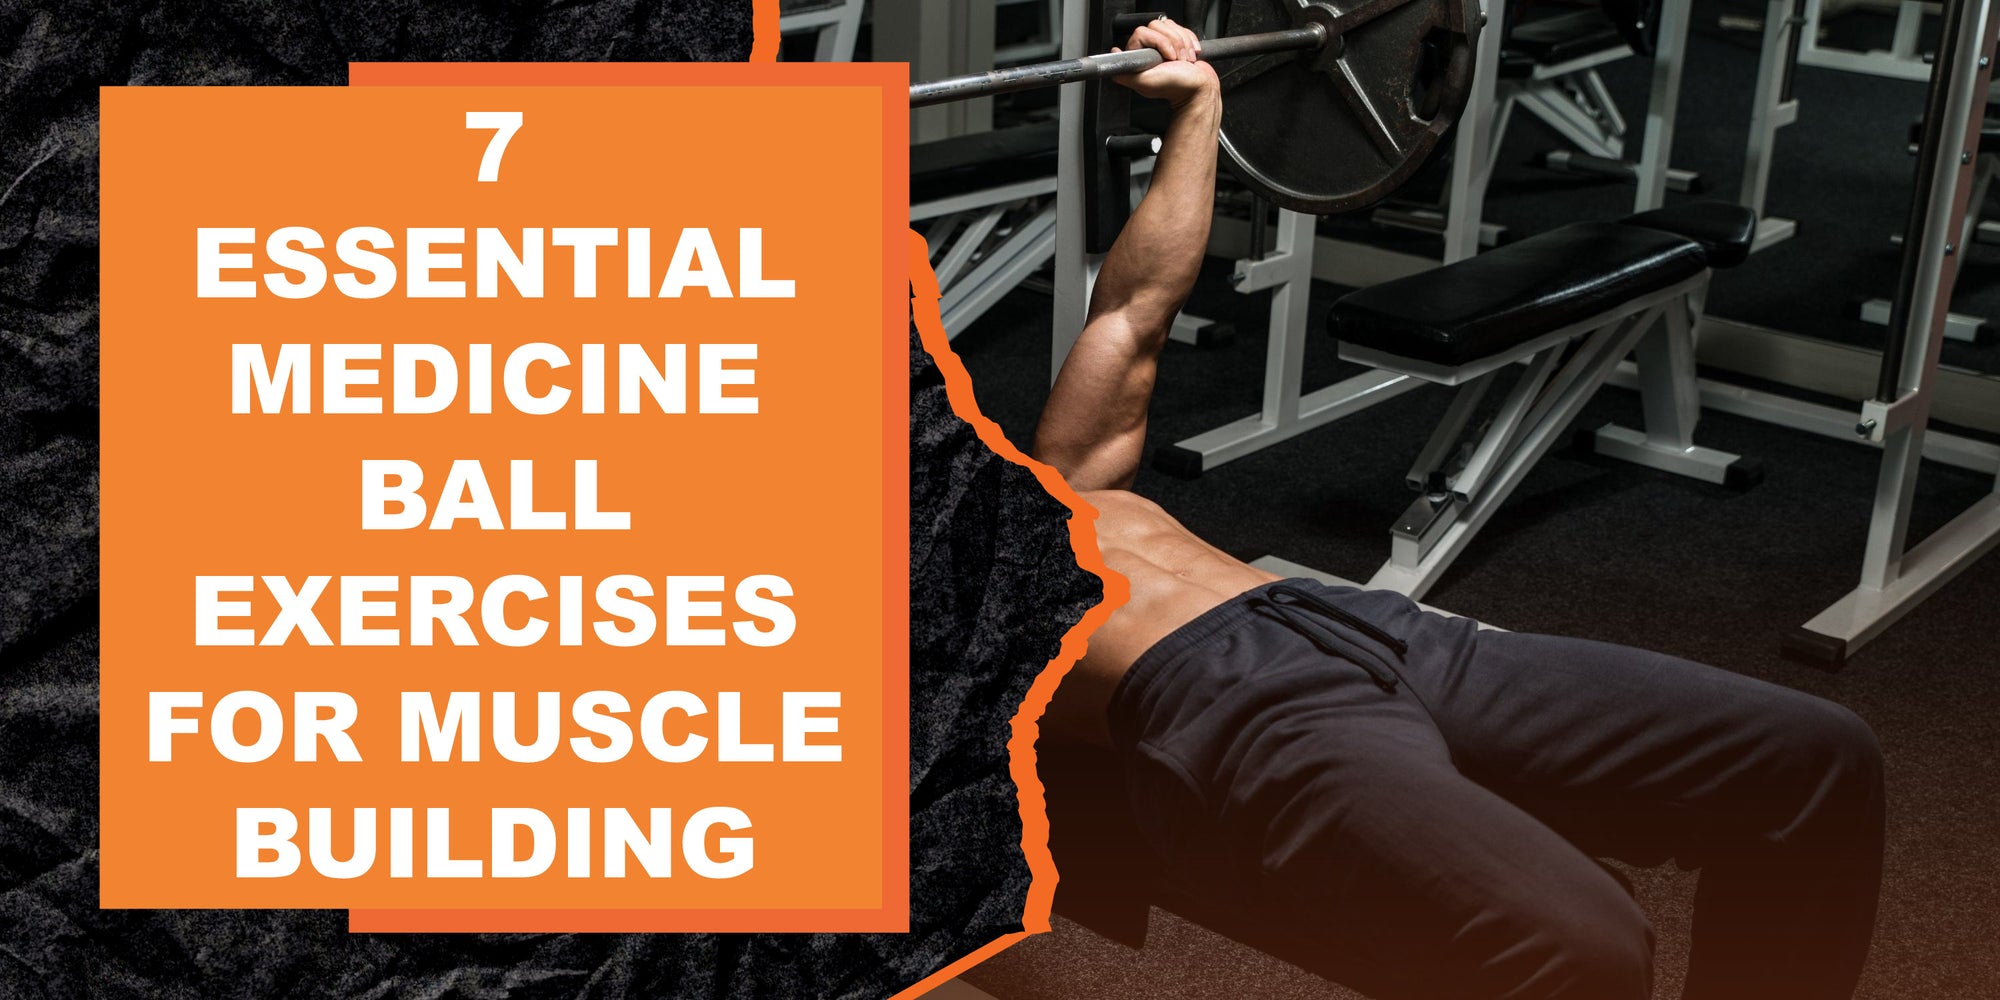 7 Essential Medicine Ball Exercises for Muscle Building